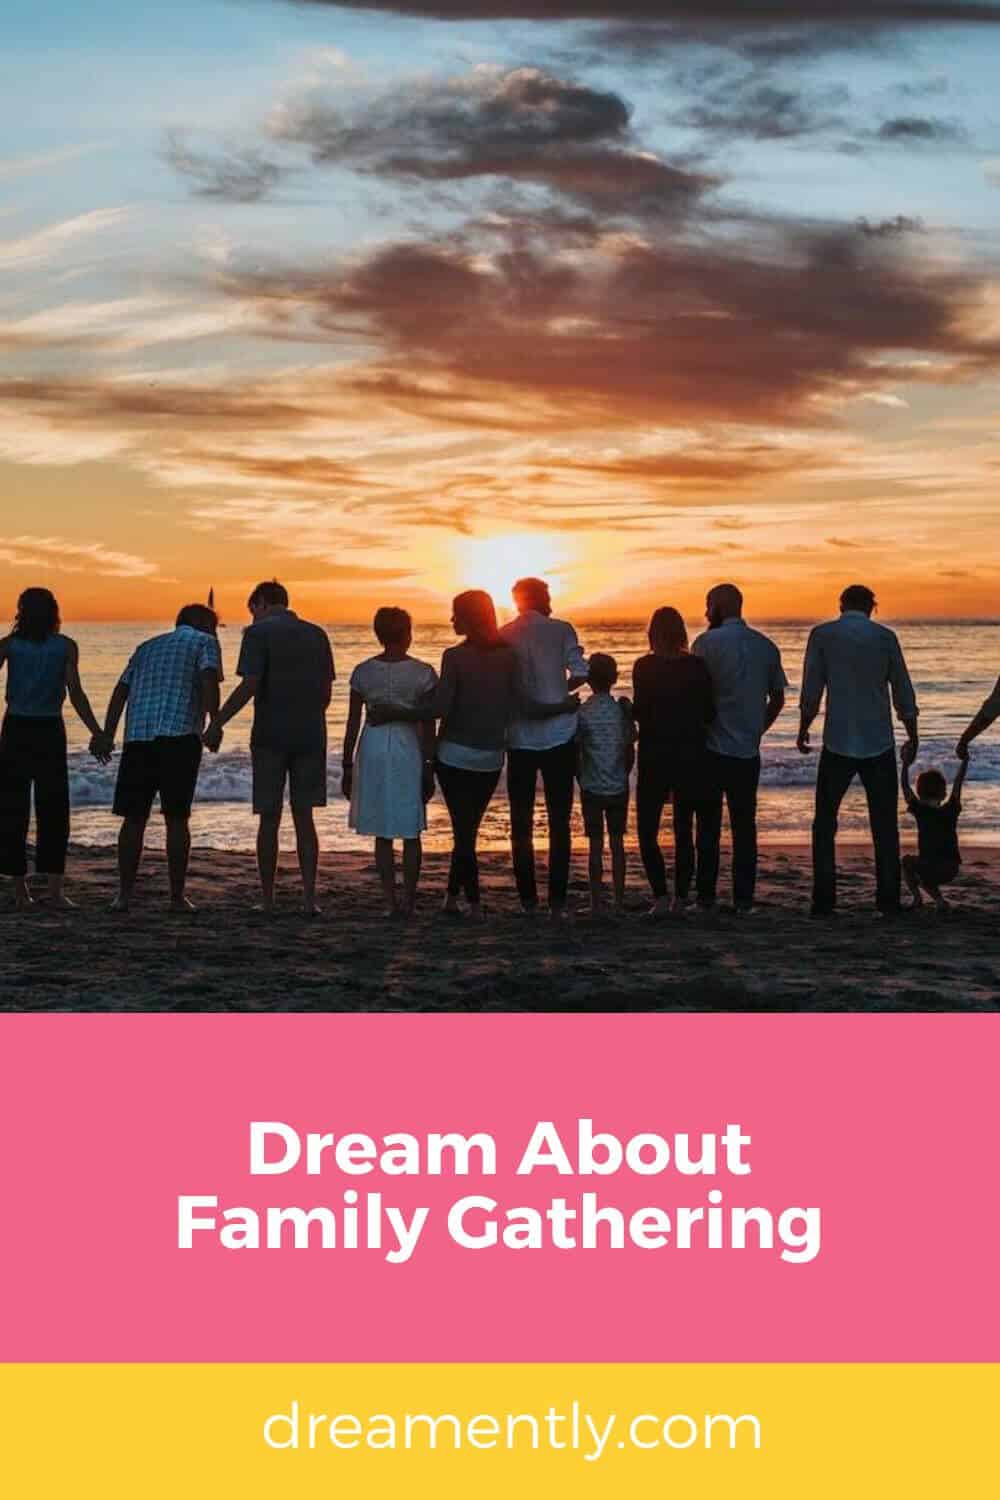 Dream About Family Gathering